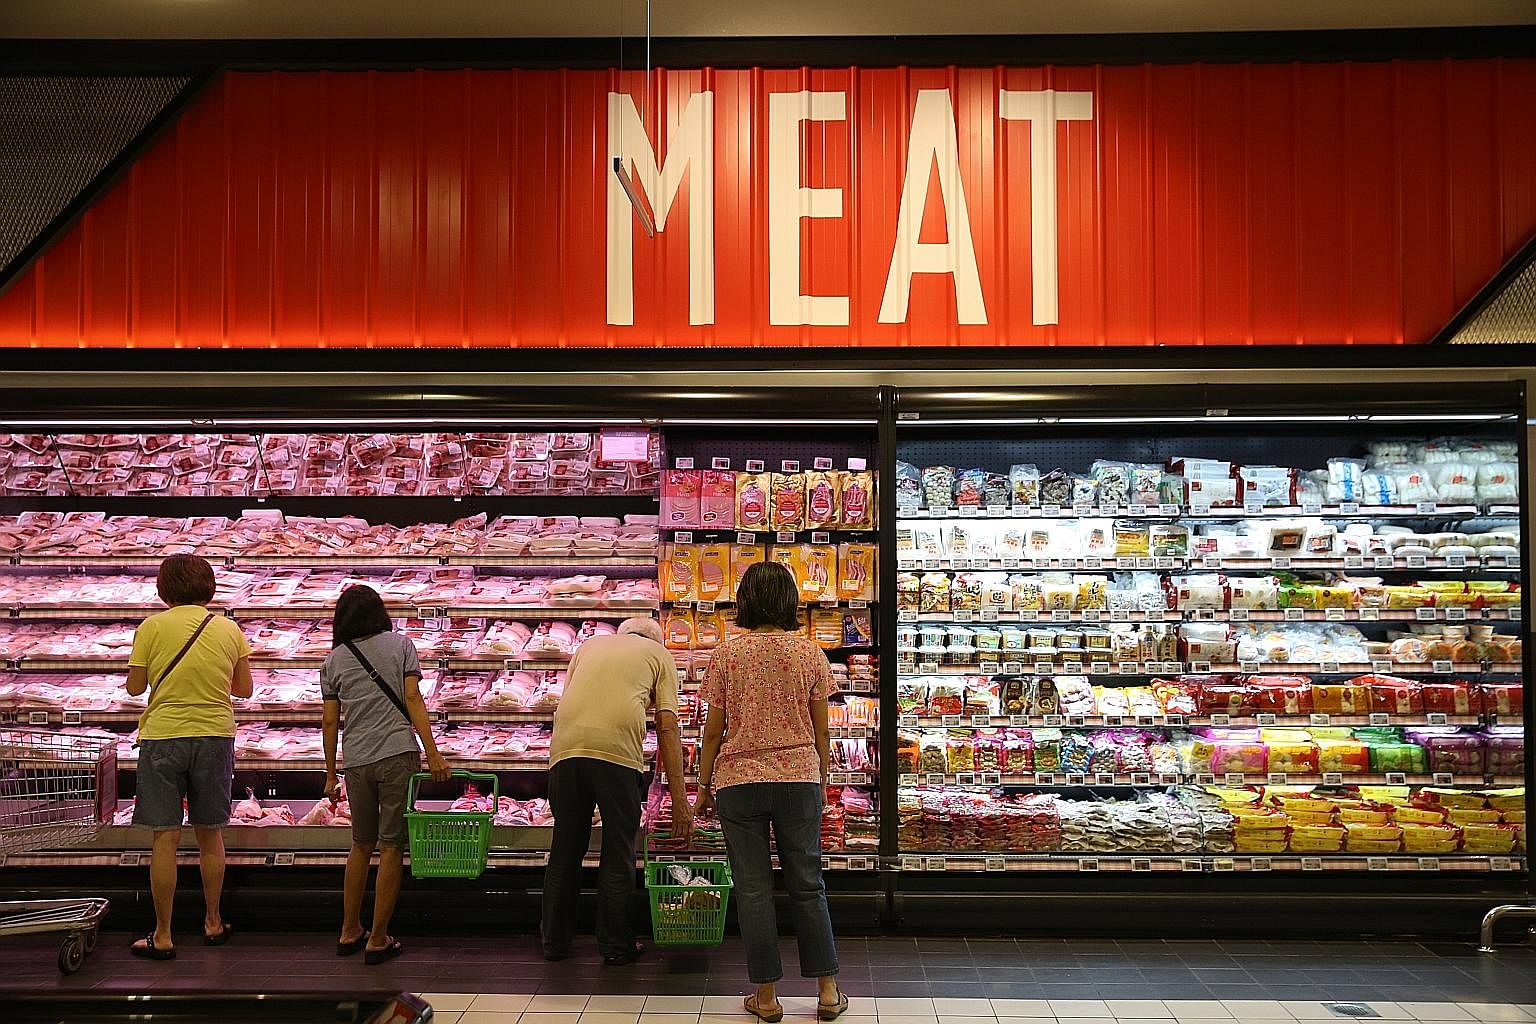 The allegation that FairPrice sells "halal pork" has been making the rounds since 2007 and persists to this day, despite being shown to be false. Falsehoods do not wither and die when exposed to the light of truth, says the writer, adding that giving